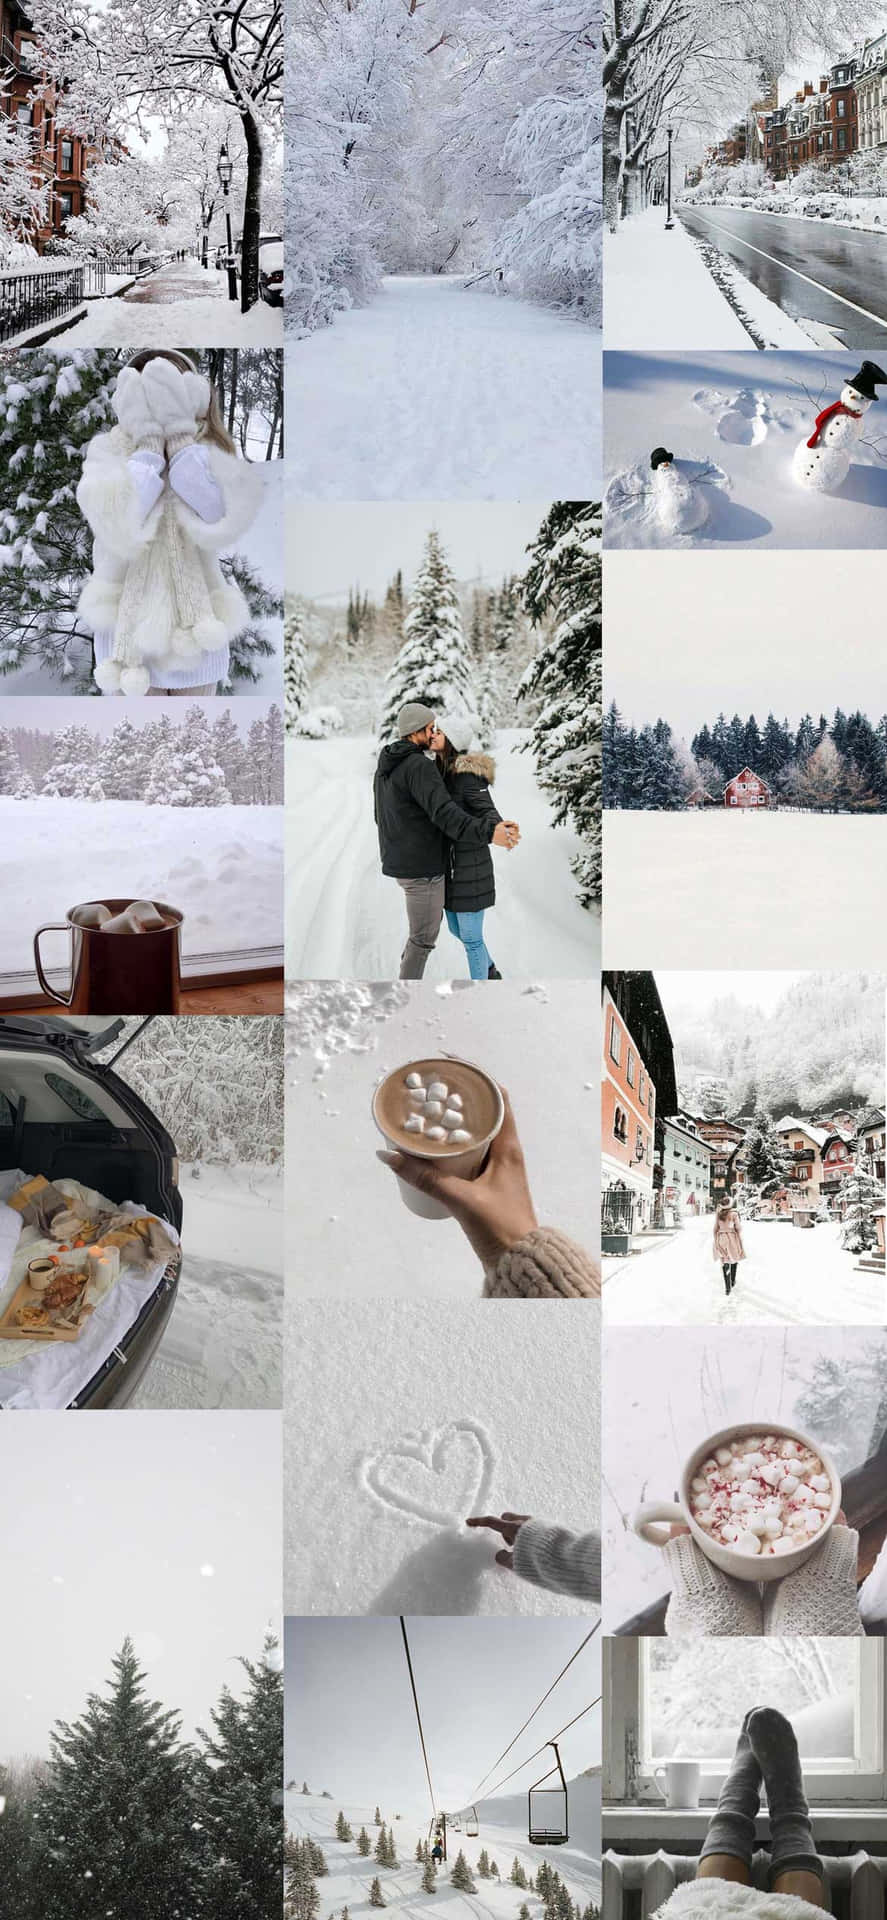 "A Wintry Morning - Aesthetic Collage" Wallpaper